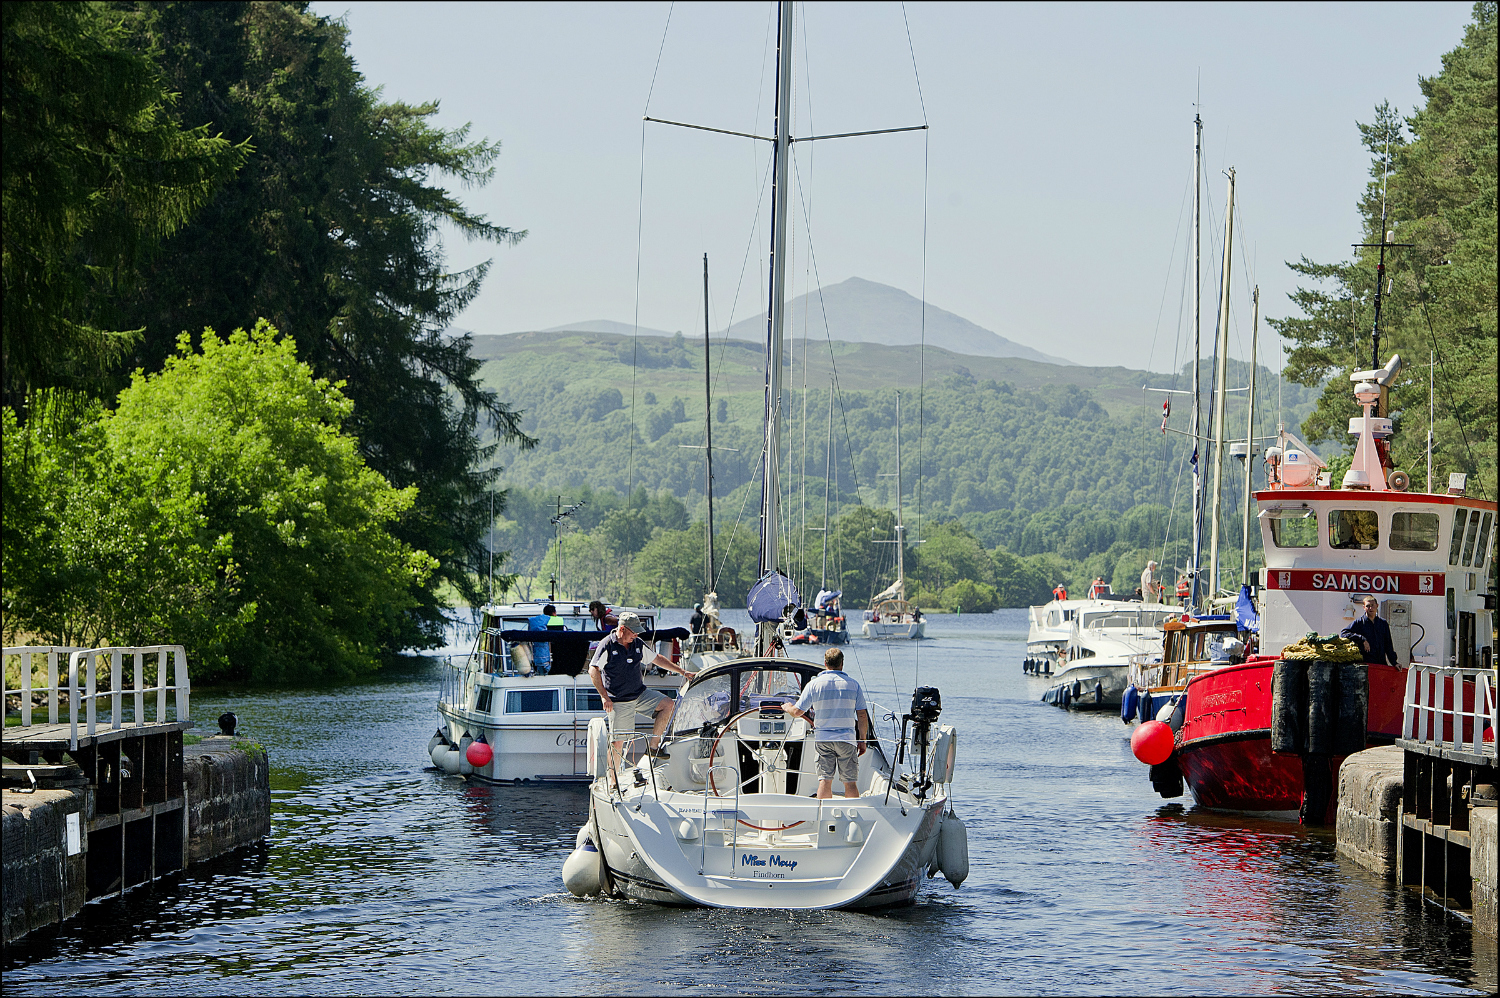 Yachts on the Caledonian Canal.